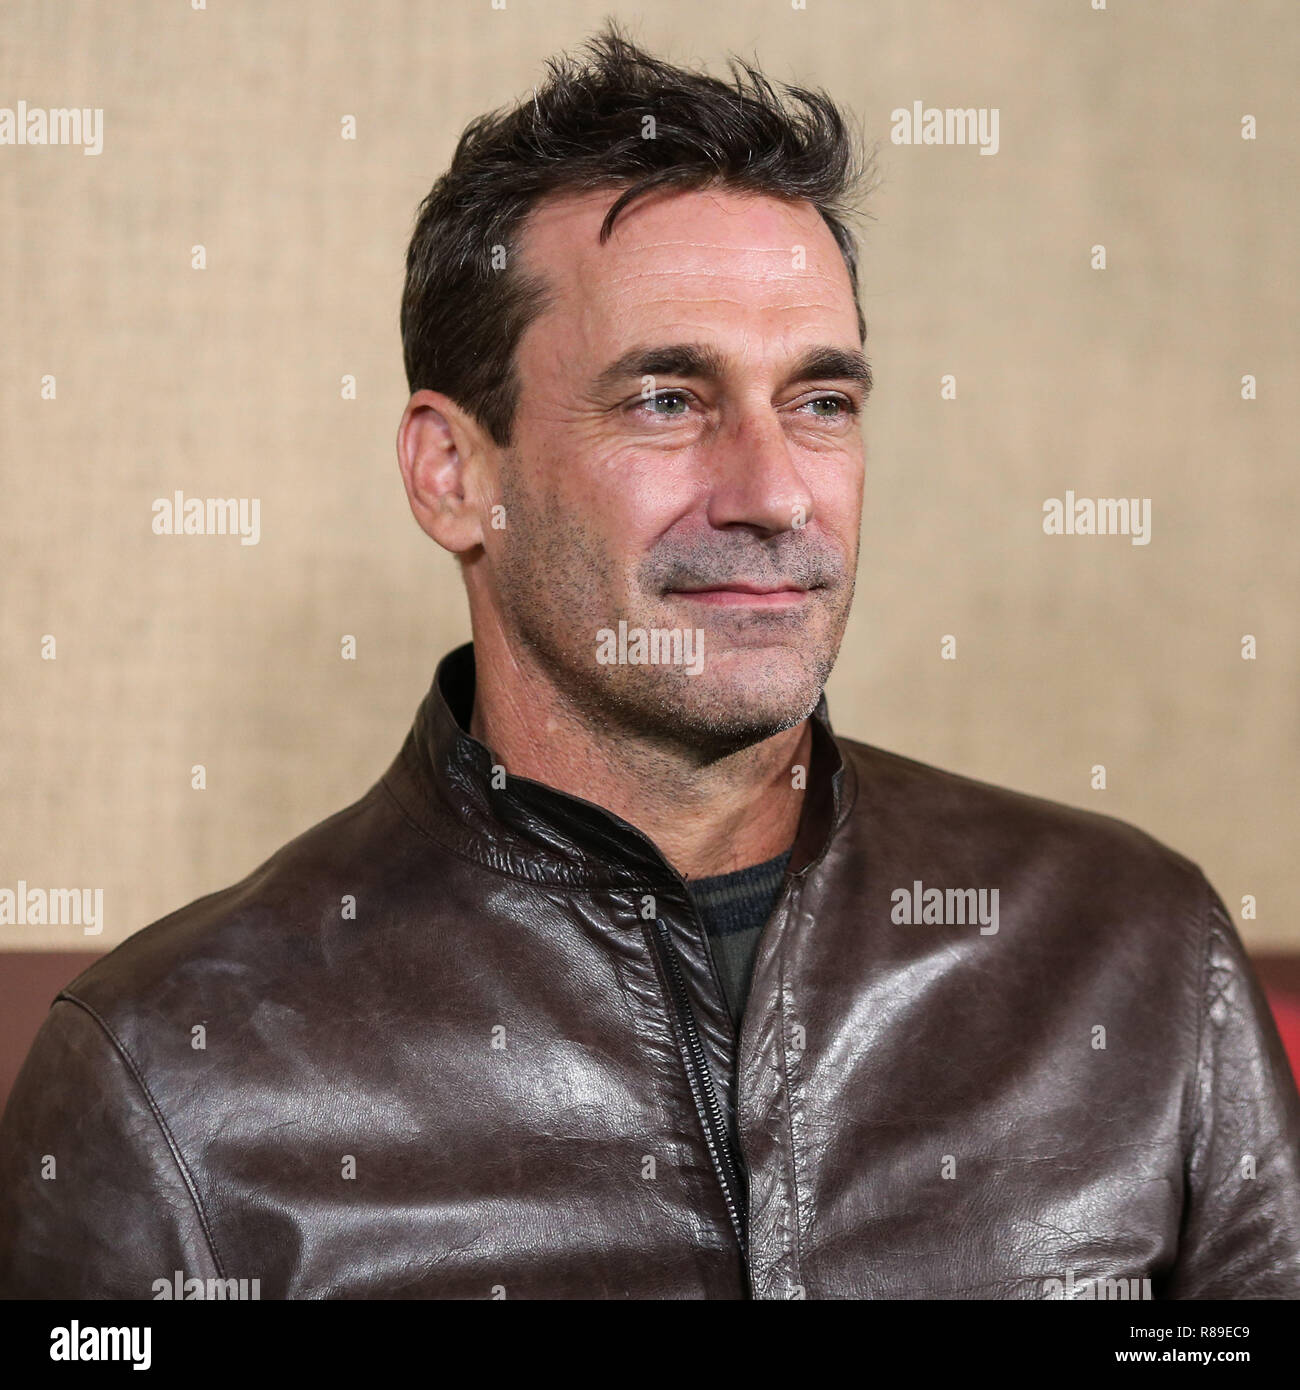 HOLLYWOOD, LOS ANGELES, CA, USA - OCTOBER 10: Jon Hamm at the Los Angeles Premiere Of HBO Series 'Camping' held at Paramount Studios on October 10, 2018 in Hollywood, Los Angeles, California, United States. (Photo by Xavier Collin/Image Press Agency) Stock Photo